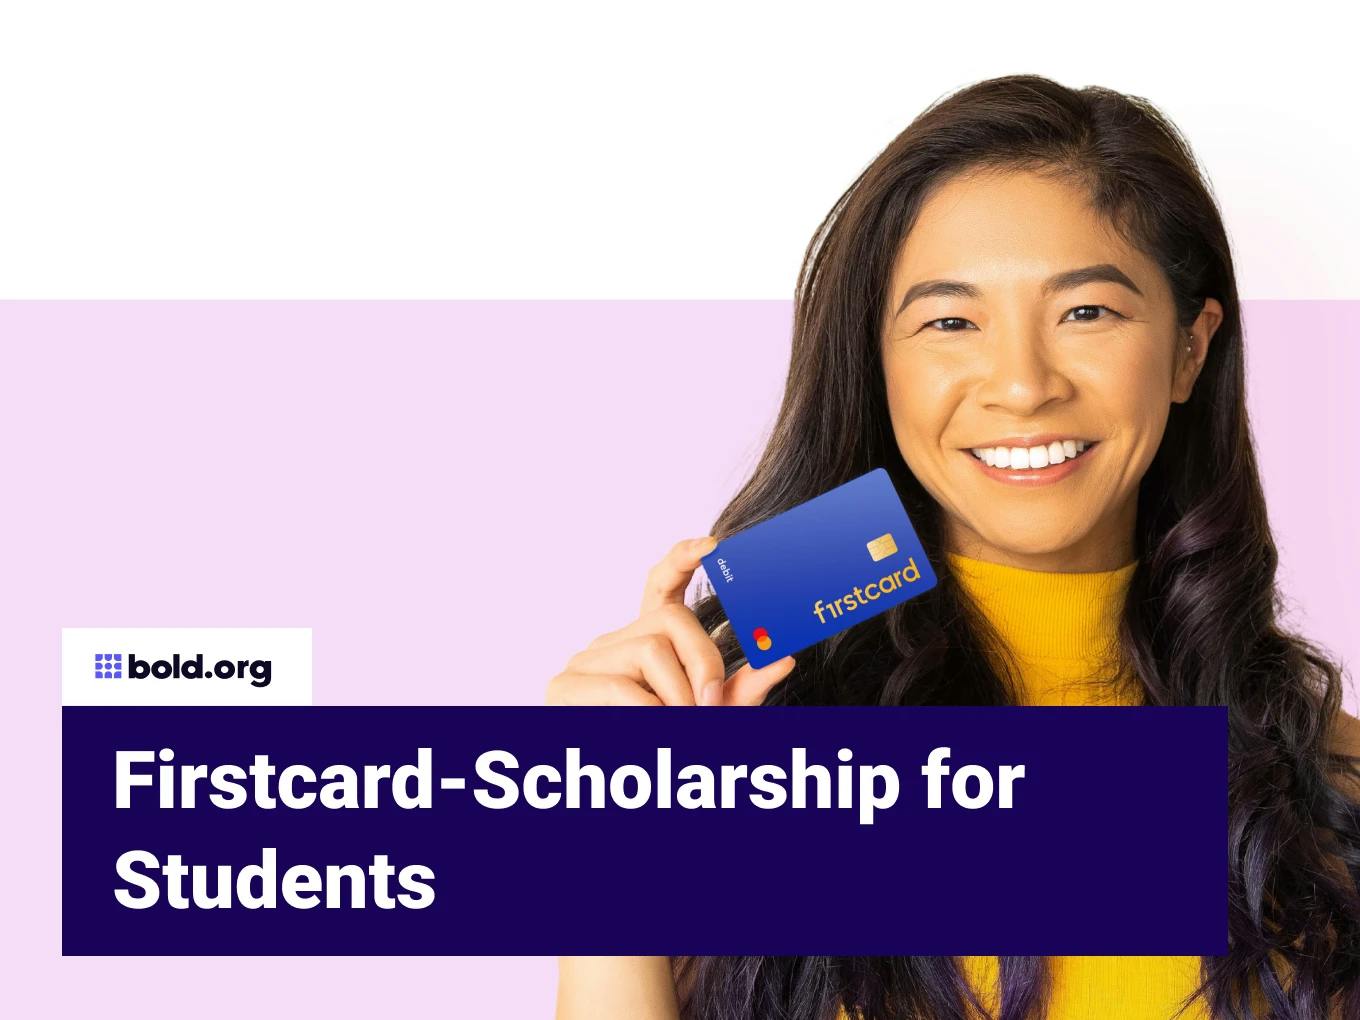 Firstcard-Scholarship for Students